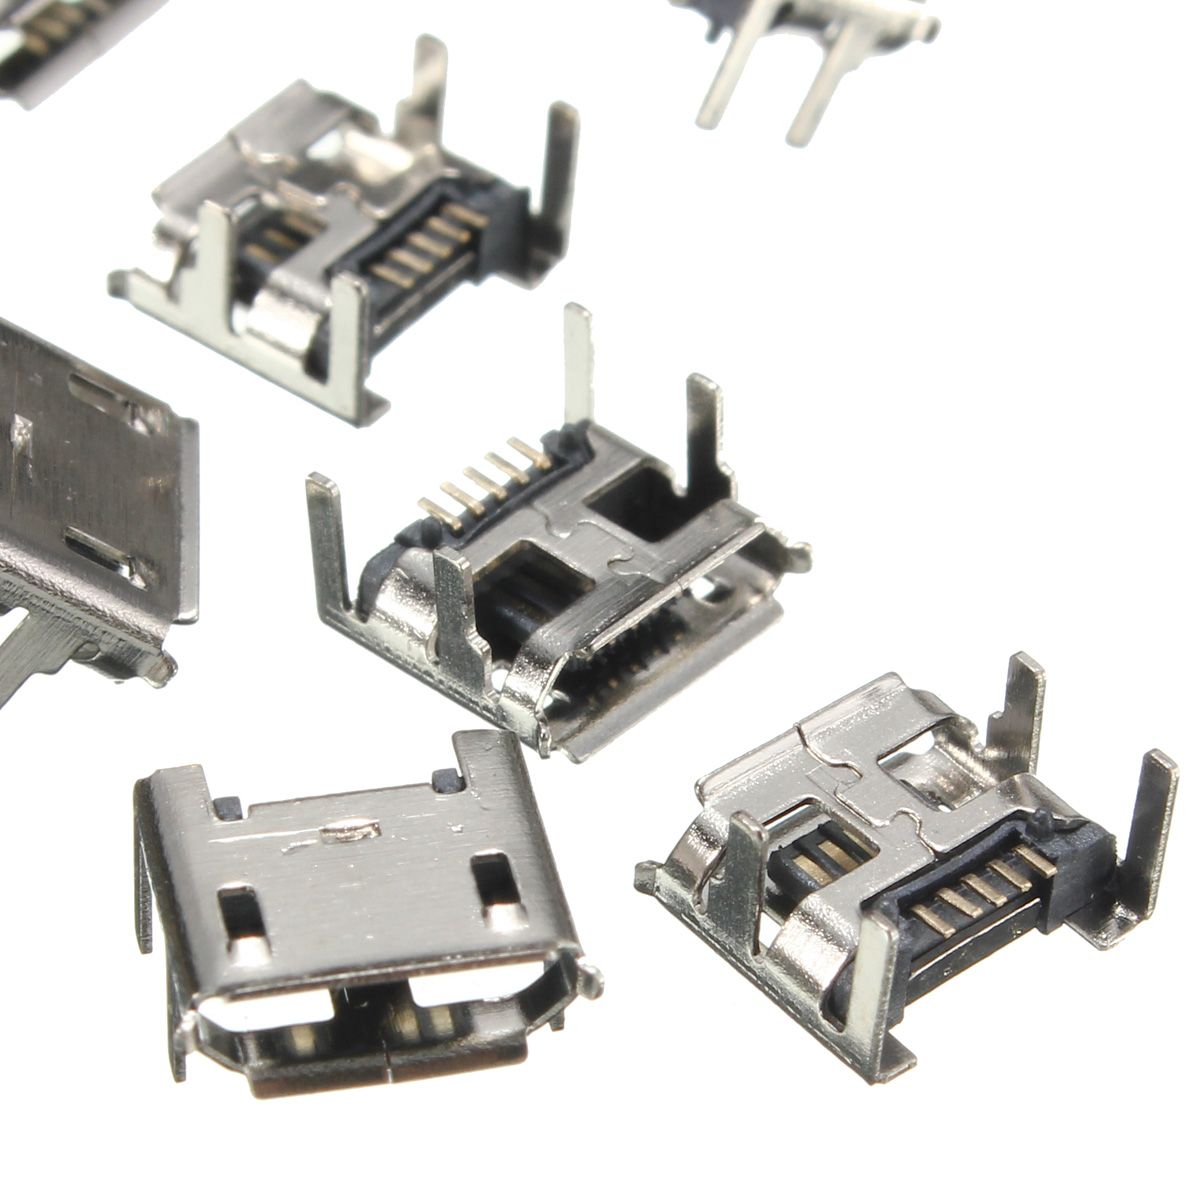 10pcs-Micro-USB-Type-B-5-Pin-Female-Socket-4-Vertical-Legs-For-Solder-Connector-1356004